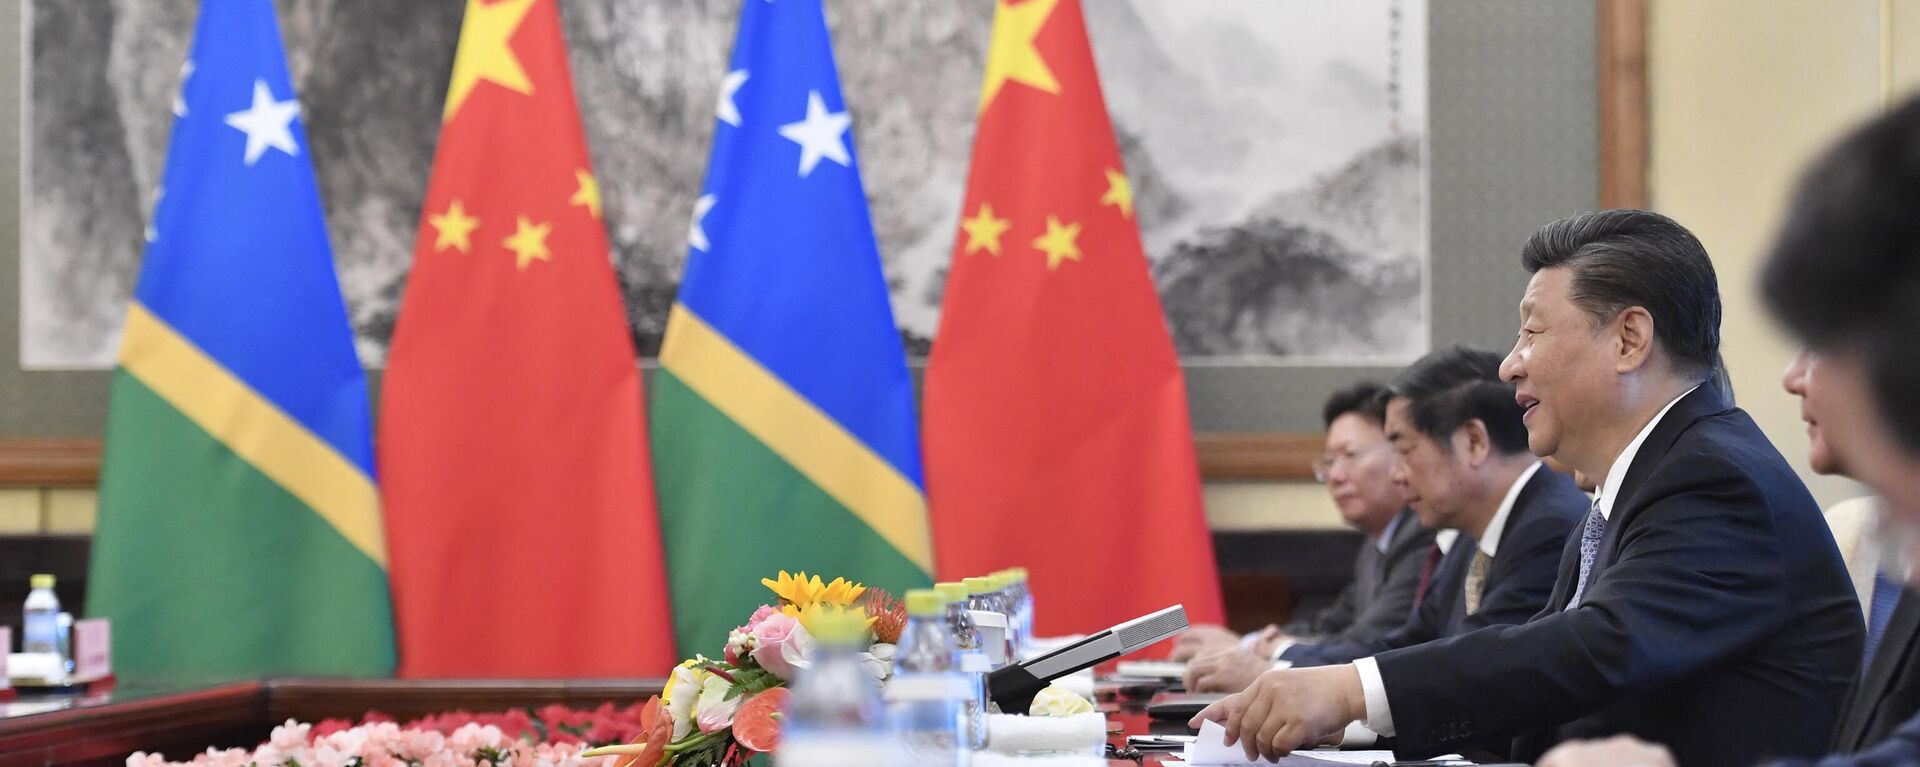 Chinese President Xi Jinping talks to Solomon Islands Prime Minister Manasseh Sogavare (not pictured) during their meeting at the Diaoyutai State Guesthouse in Beijing on October 9, 2019. (Photo by Parker Song / POOL / AFP) - Sputnik International, 1920, 13.04.2022